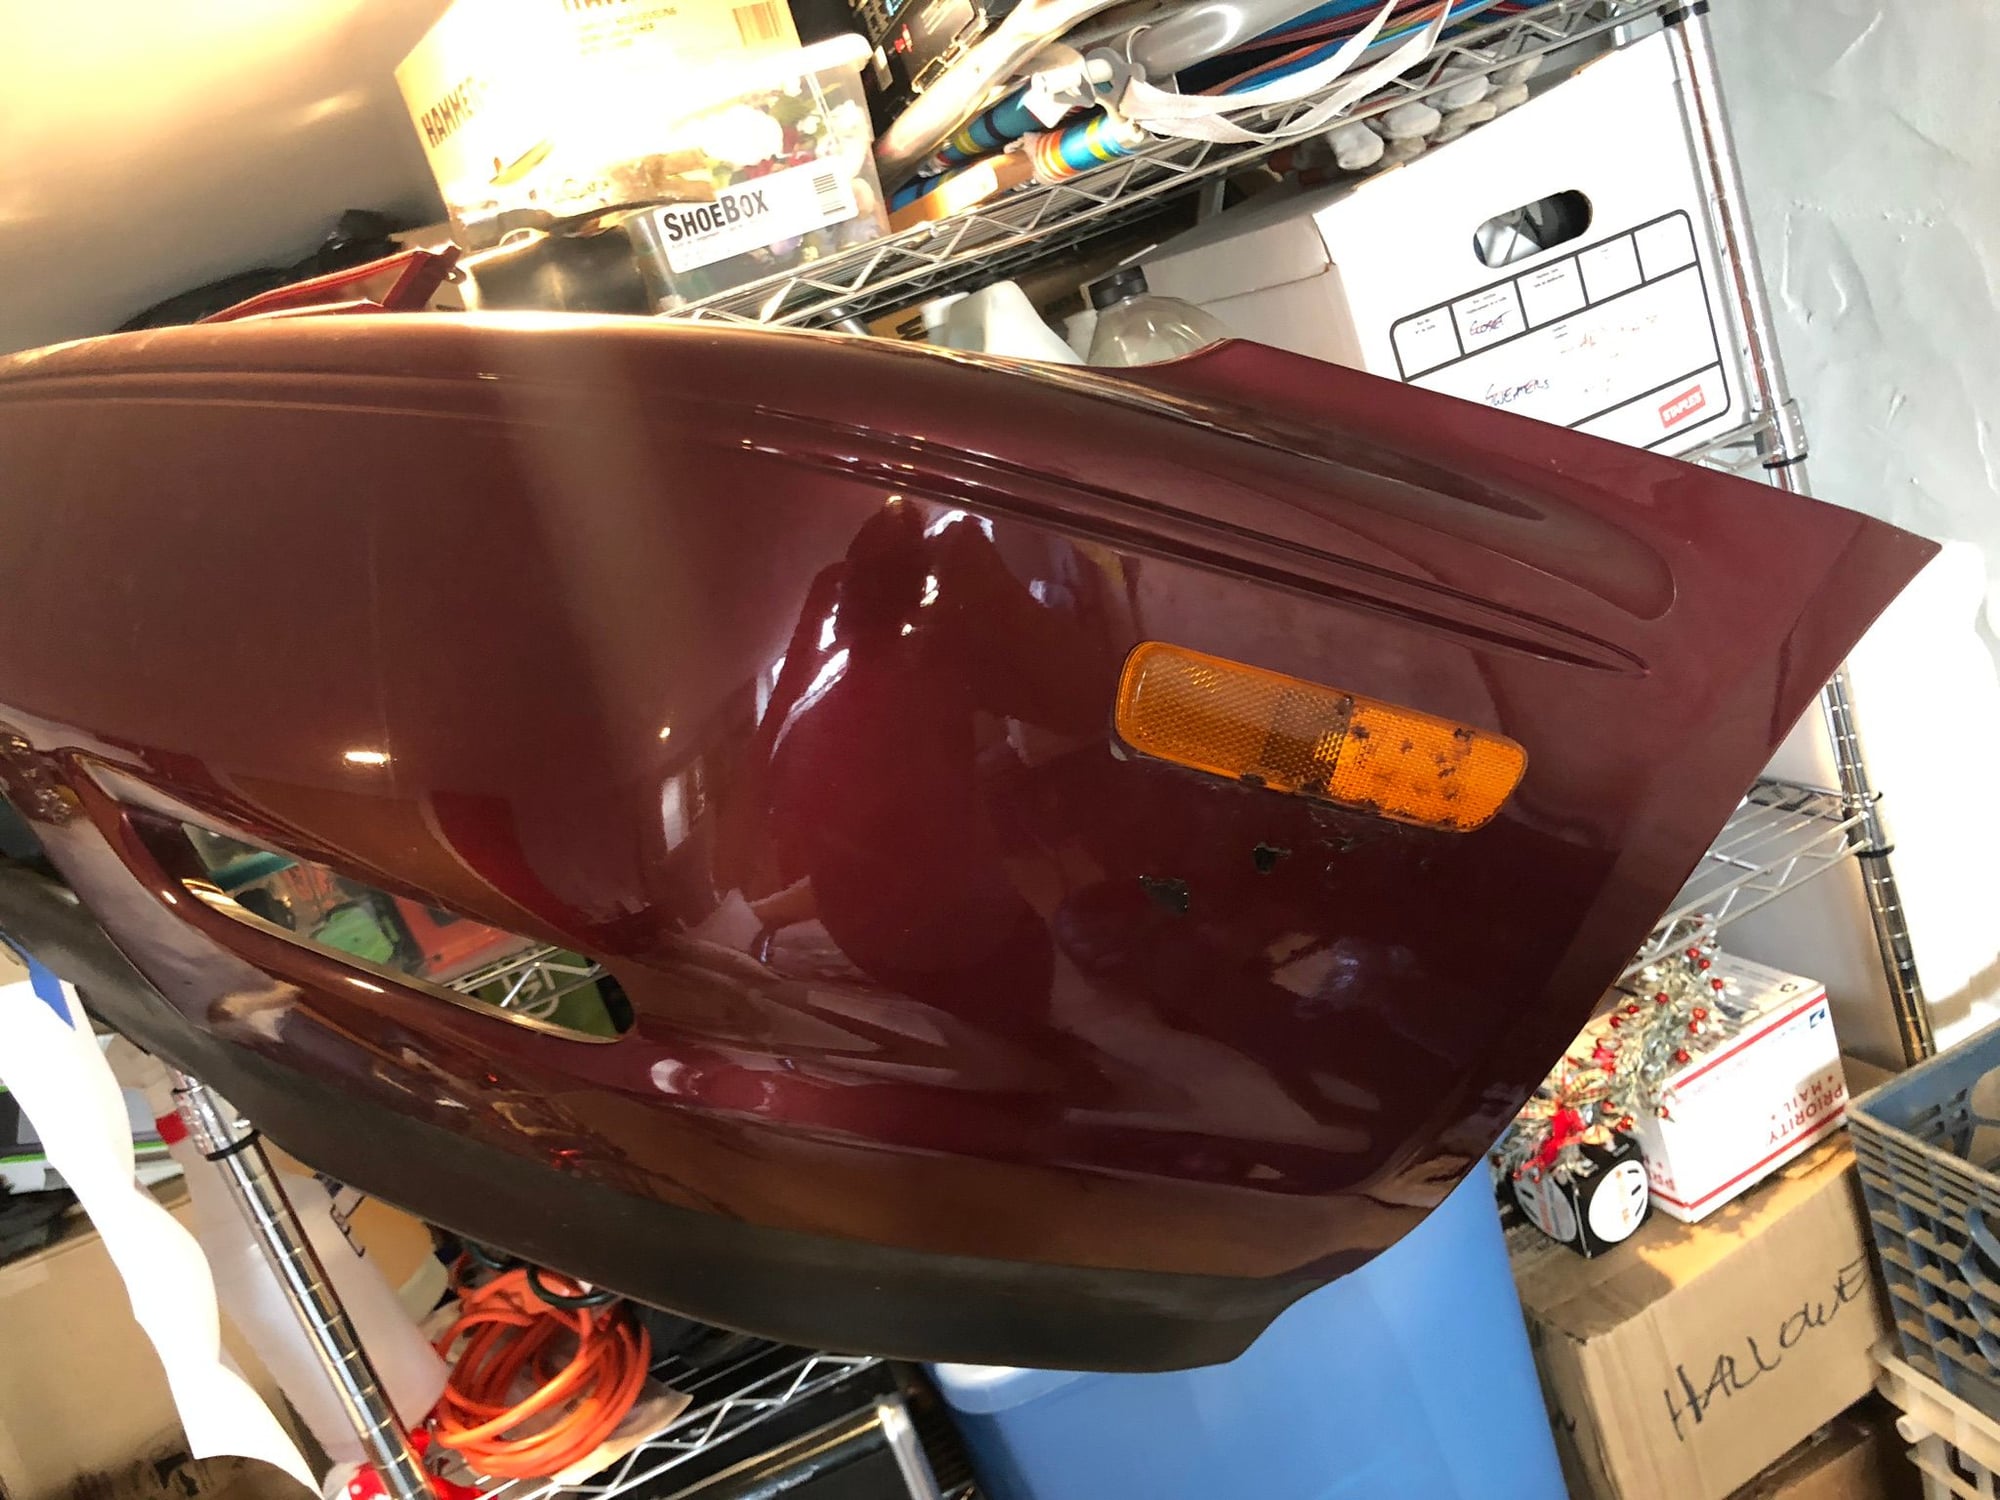 Exterior Body Parts - FS: 2001 RX300 Venetian Red Pearl Bumper + Cover, excellent condition - Used - 2000 to 2005 Lexus RX300 - Astoria, NY 11102, United States